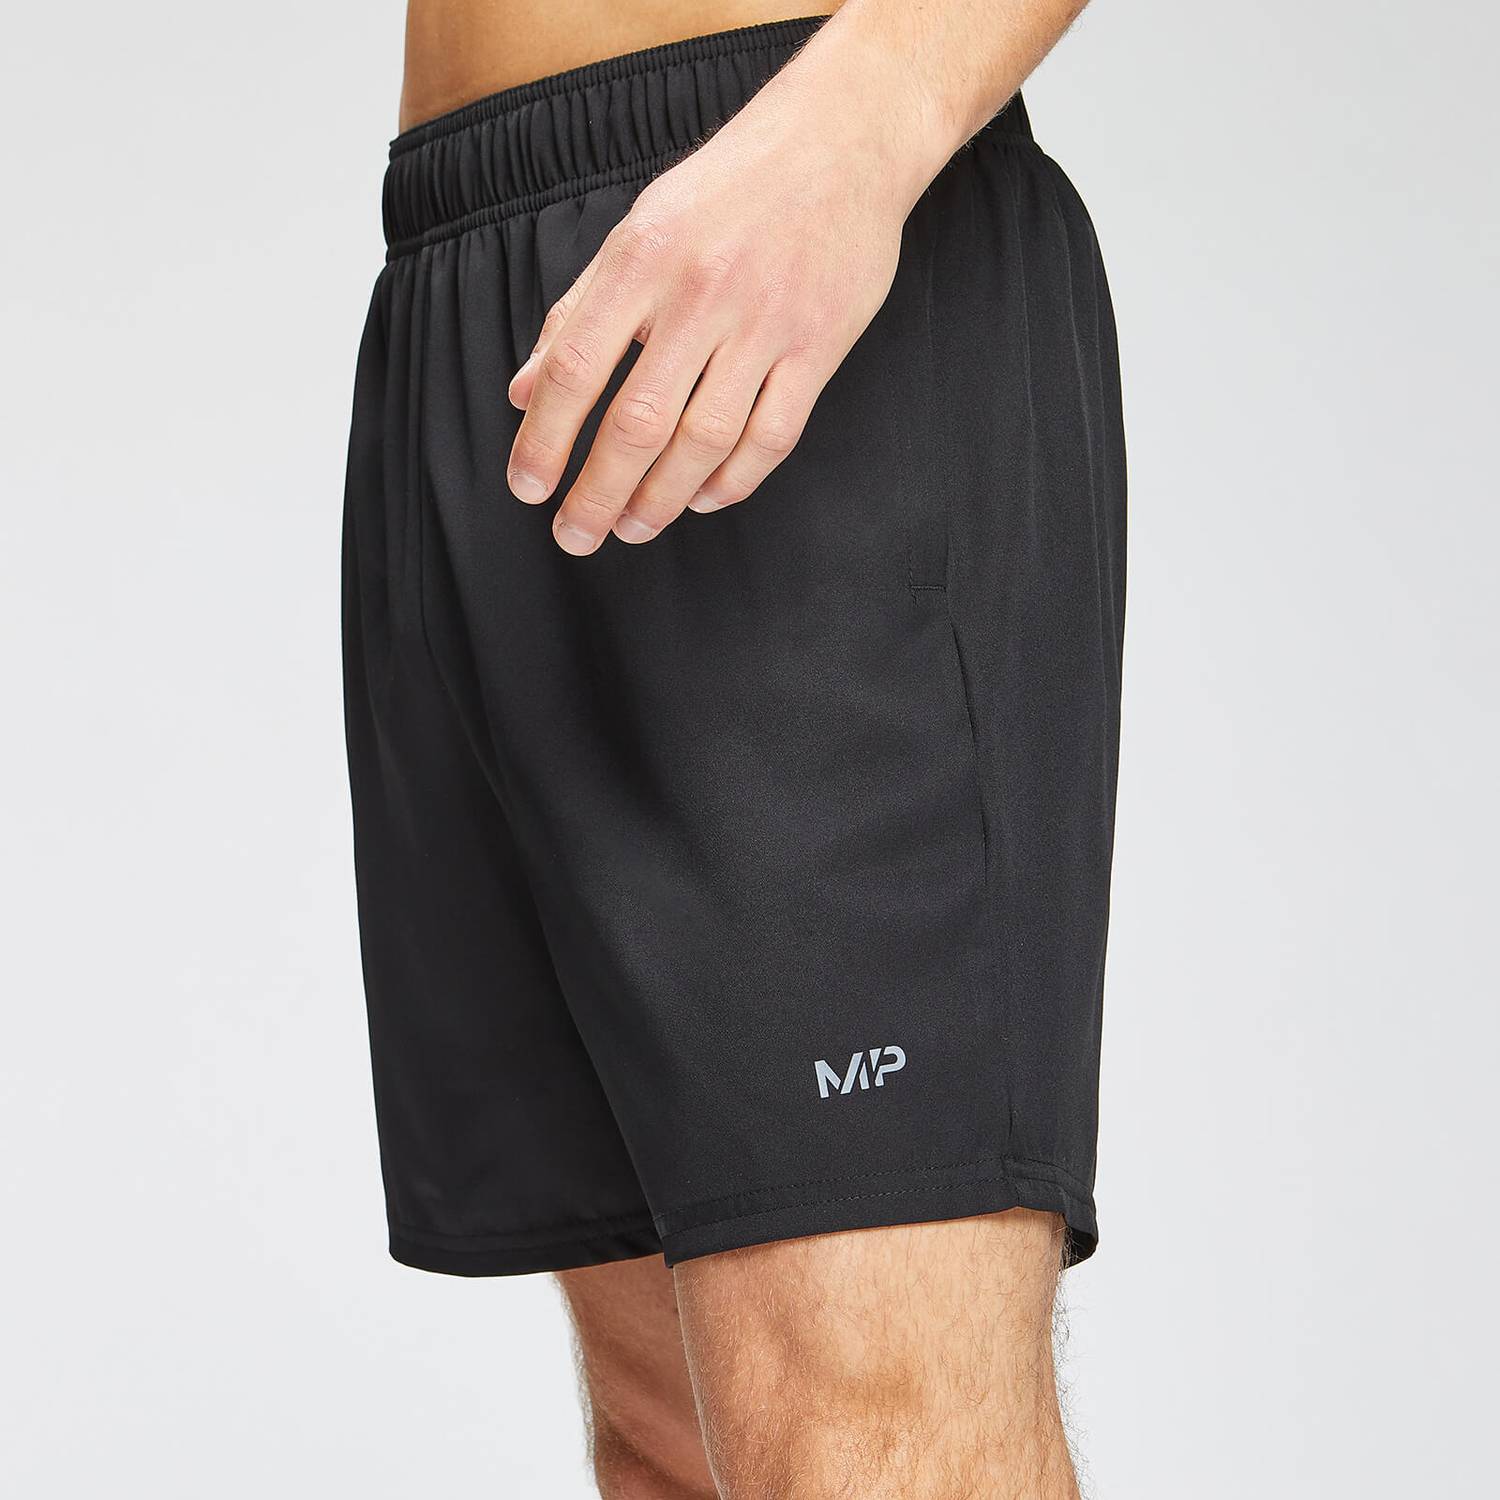 Myprotein Repeat shorts